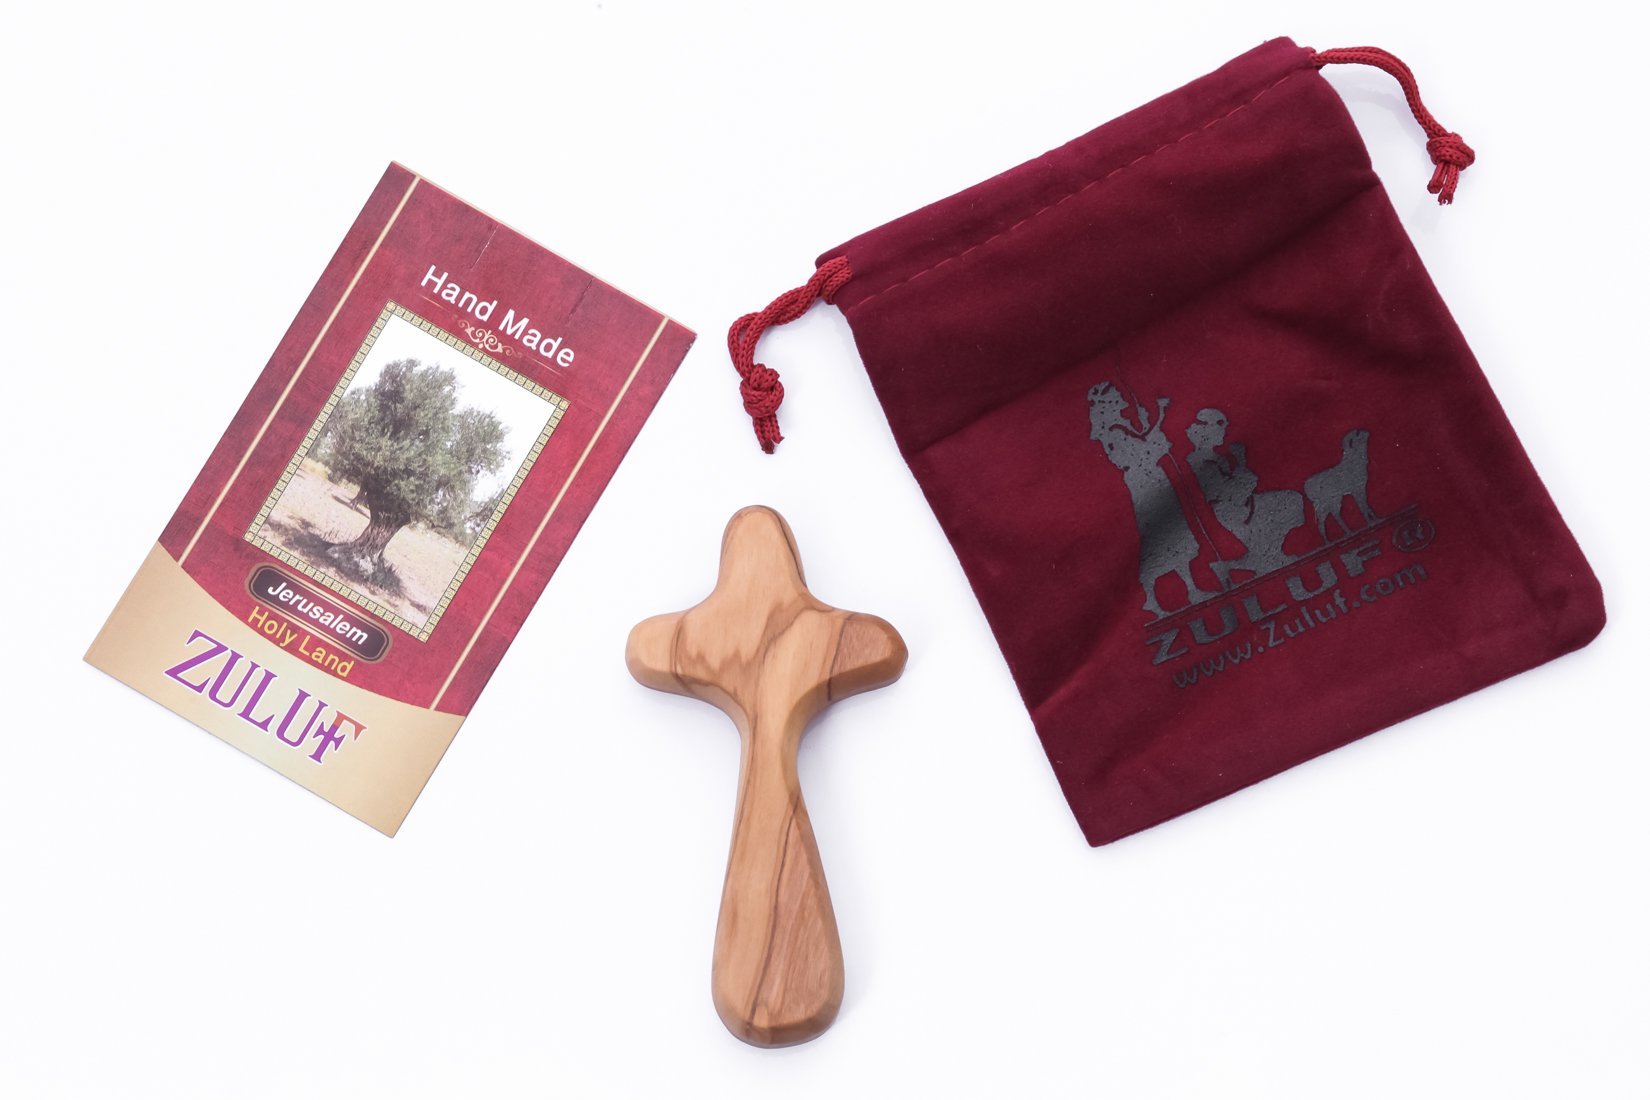 Olive Wood Comfort Crosses With Gift Bags - Zuluf